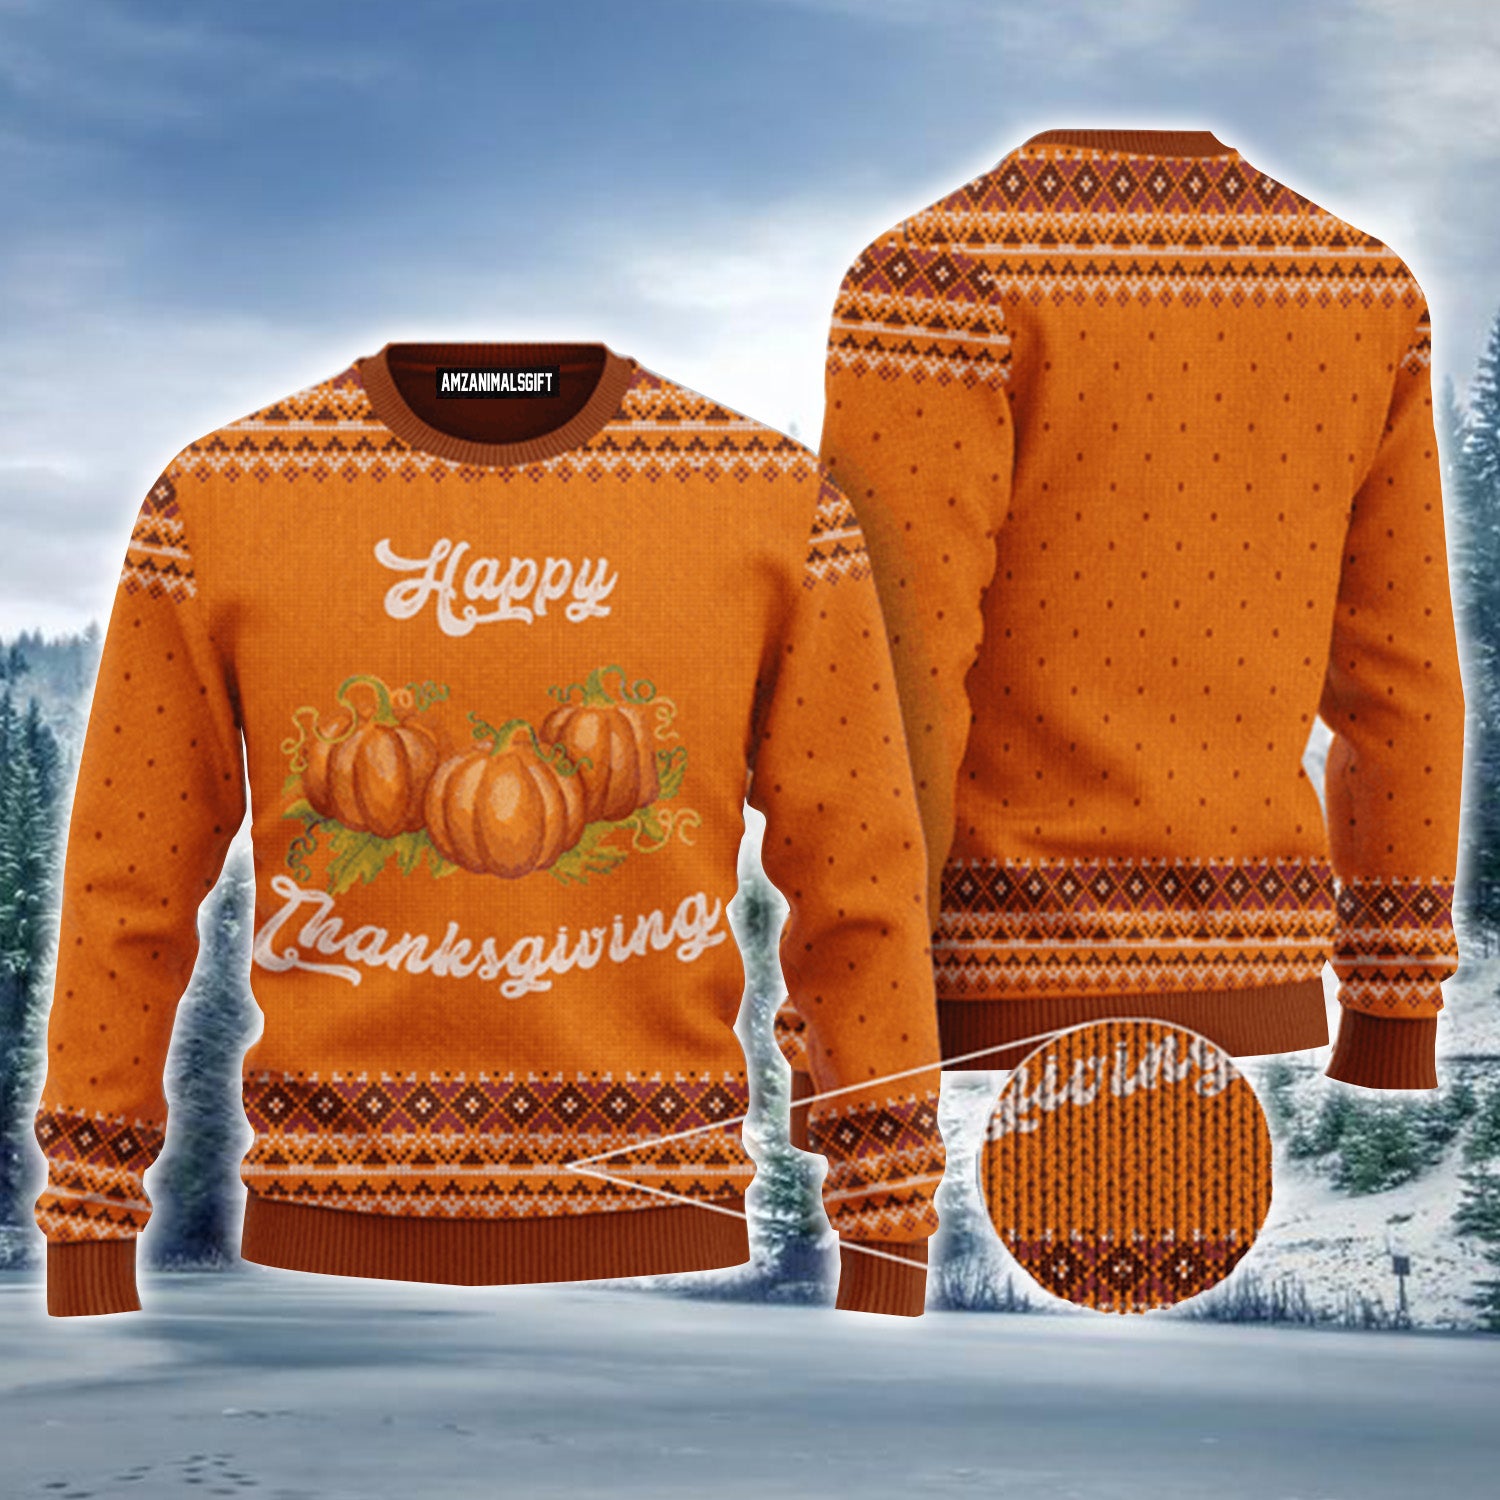 Happy Thanksgiving Pumpkin Urly Sweater, Thanksgiving Sweater For Men & Women - Perfect Gift For Thanksgiving, New Year, Winter